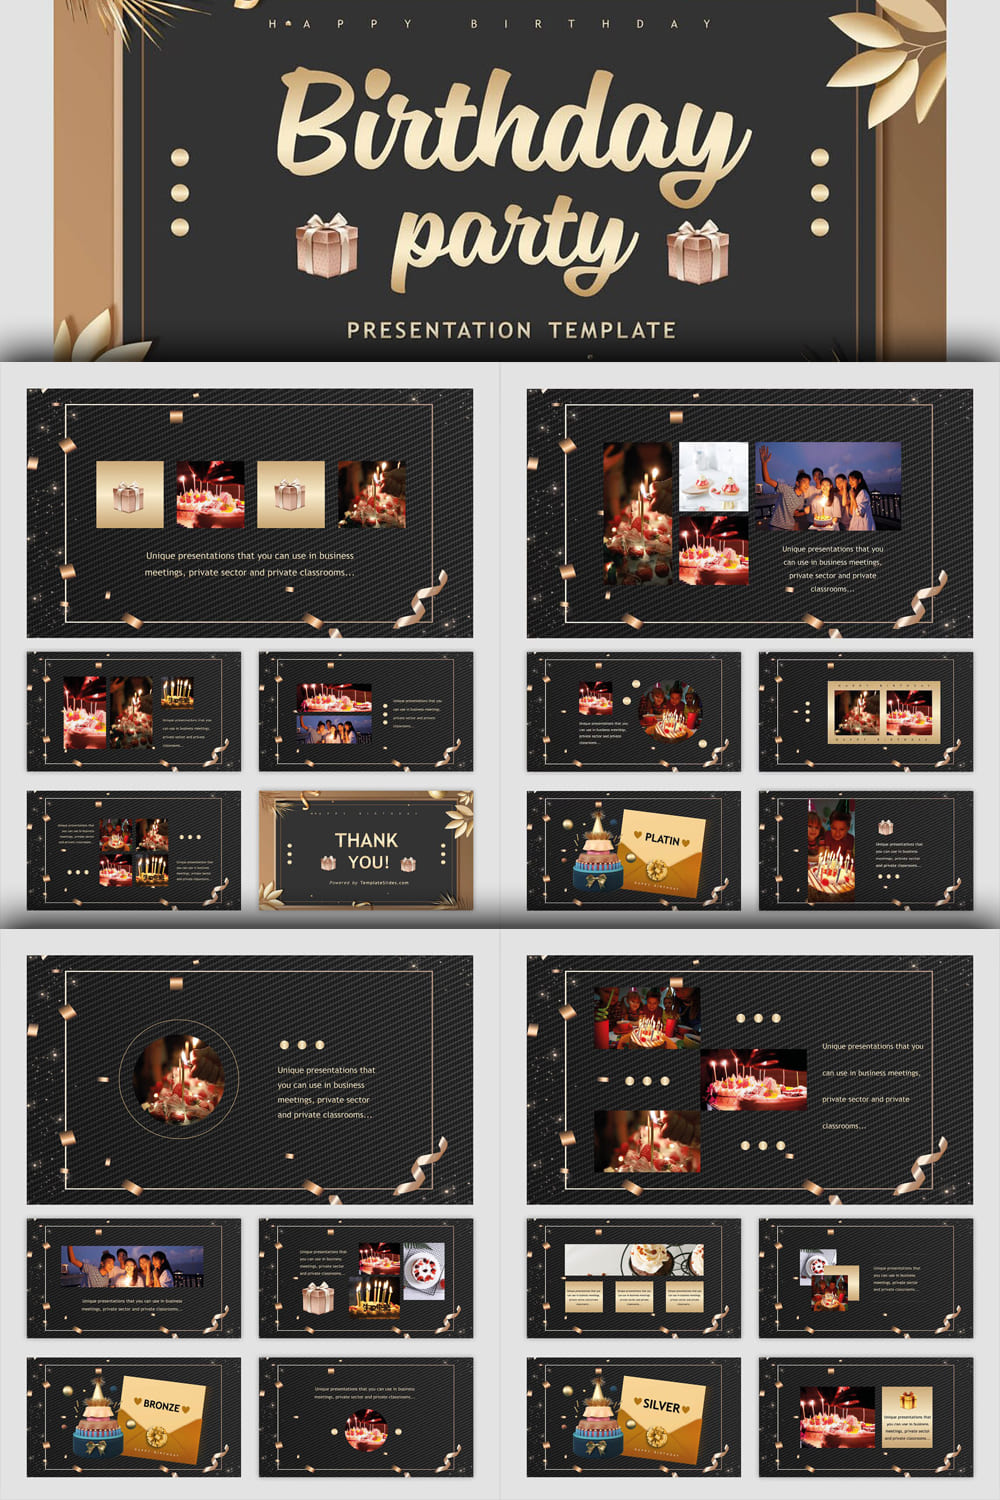 Birthday Party Events Powerpoint Template - Pinterest.